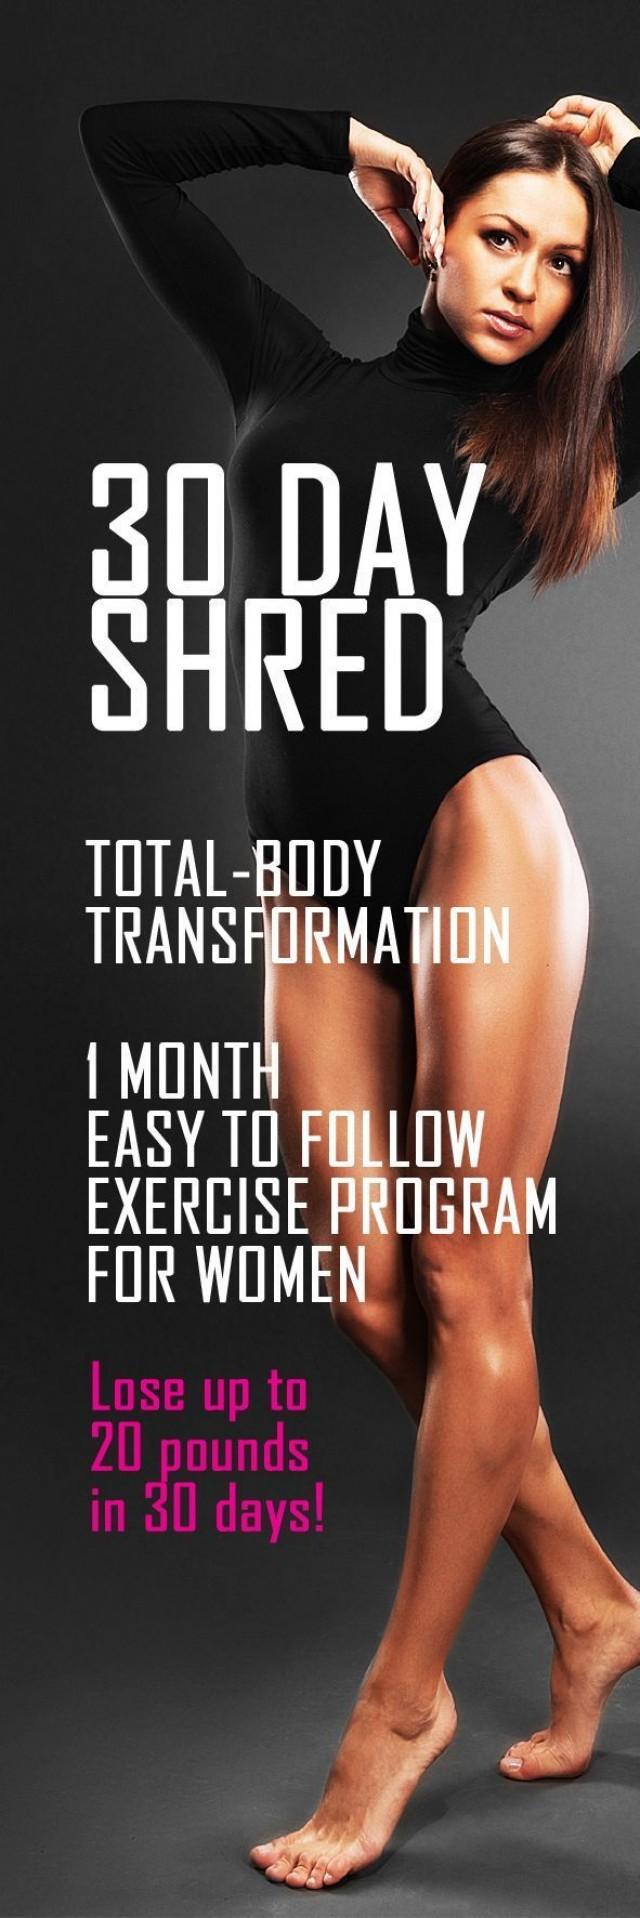 30 day shred level 2 workout